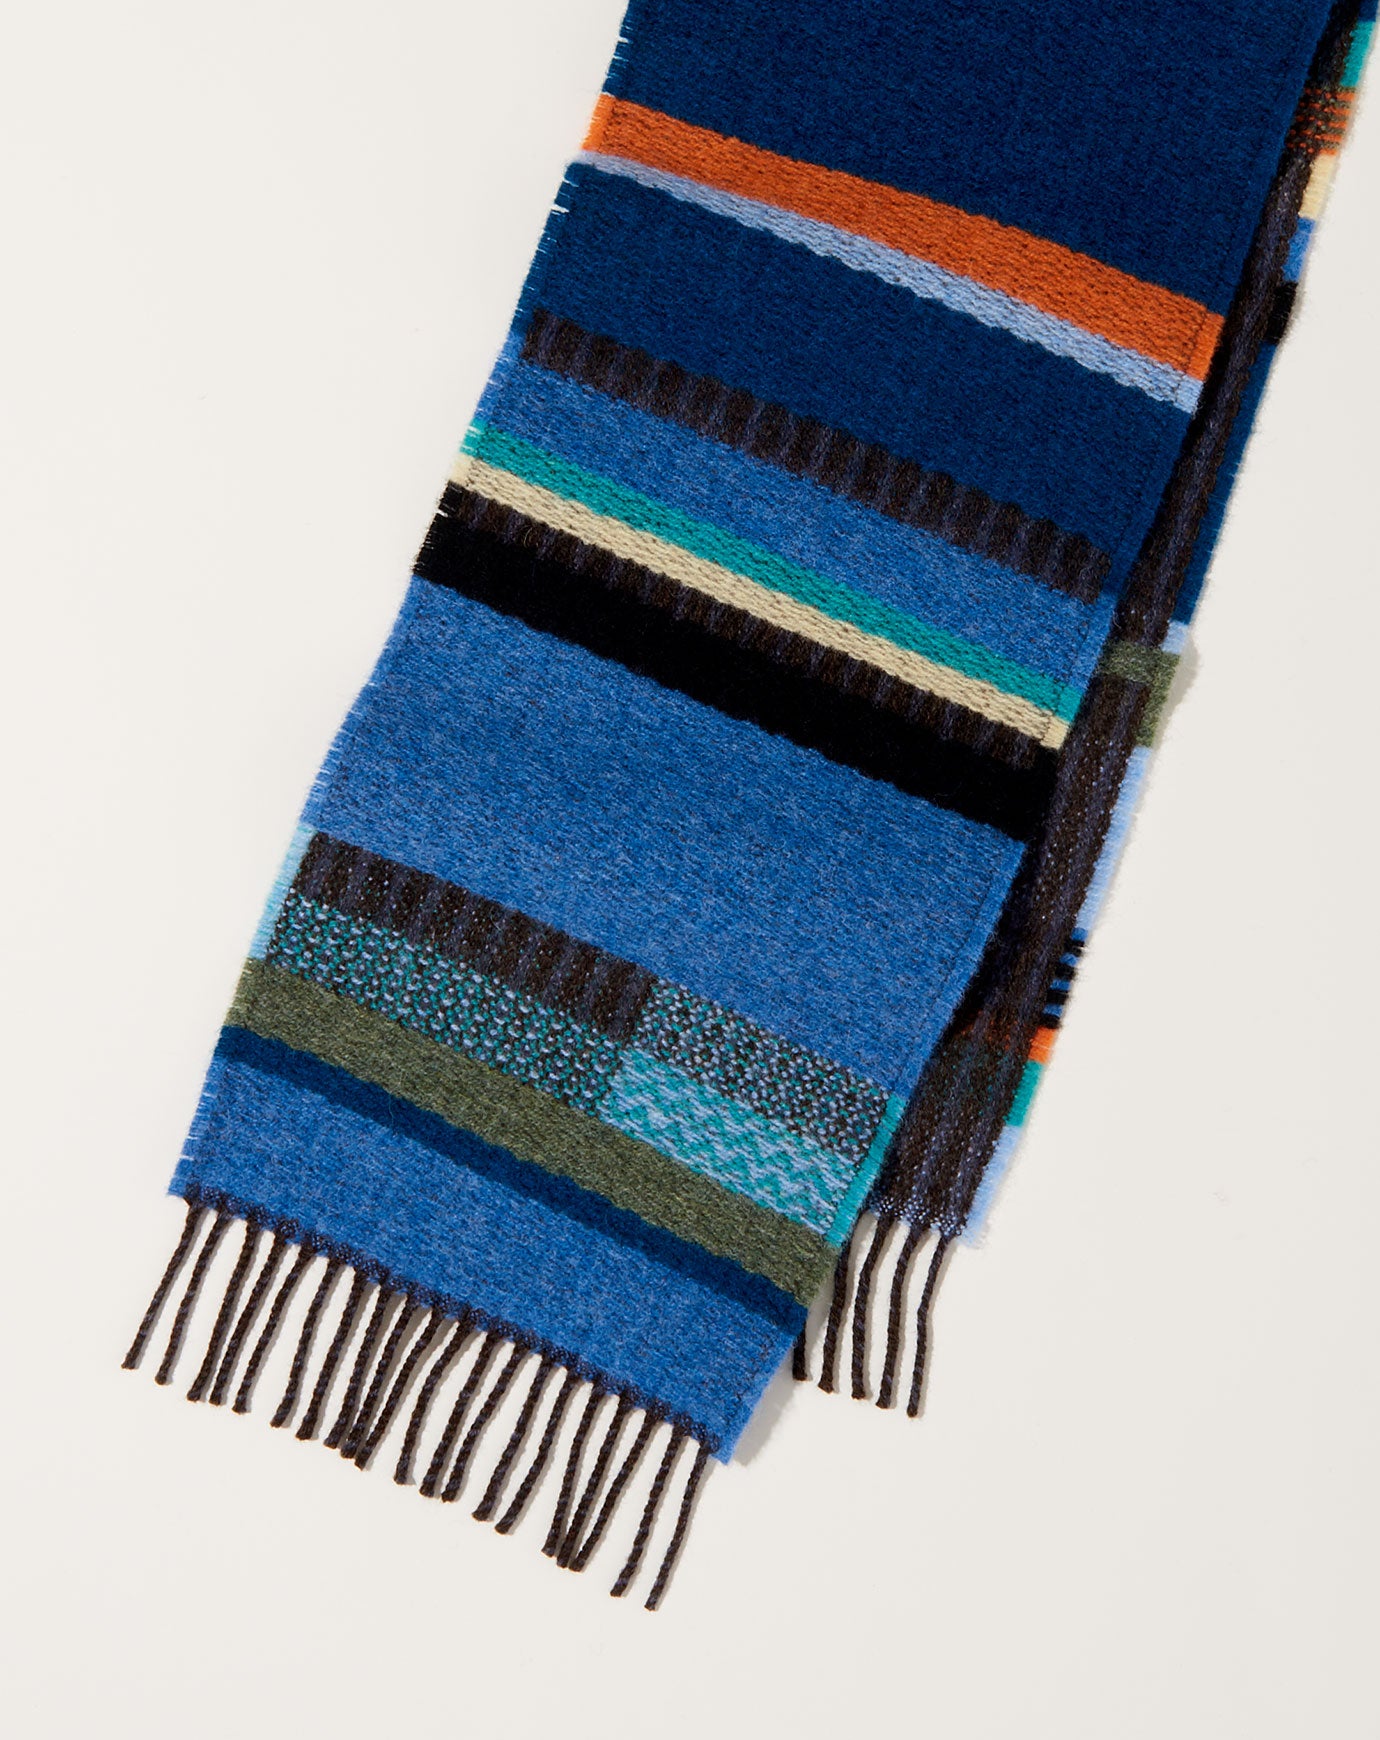 Wallace Sewell Darland Scarf in Blue